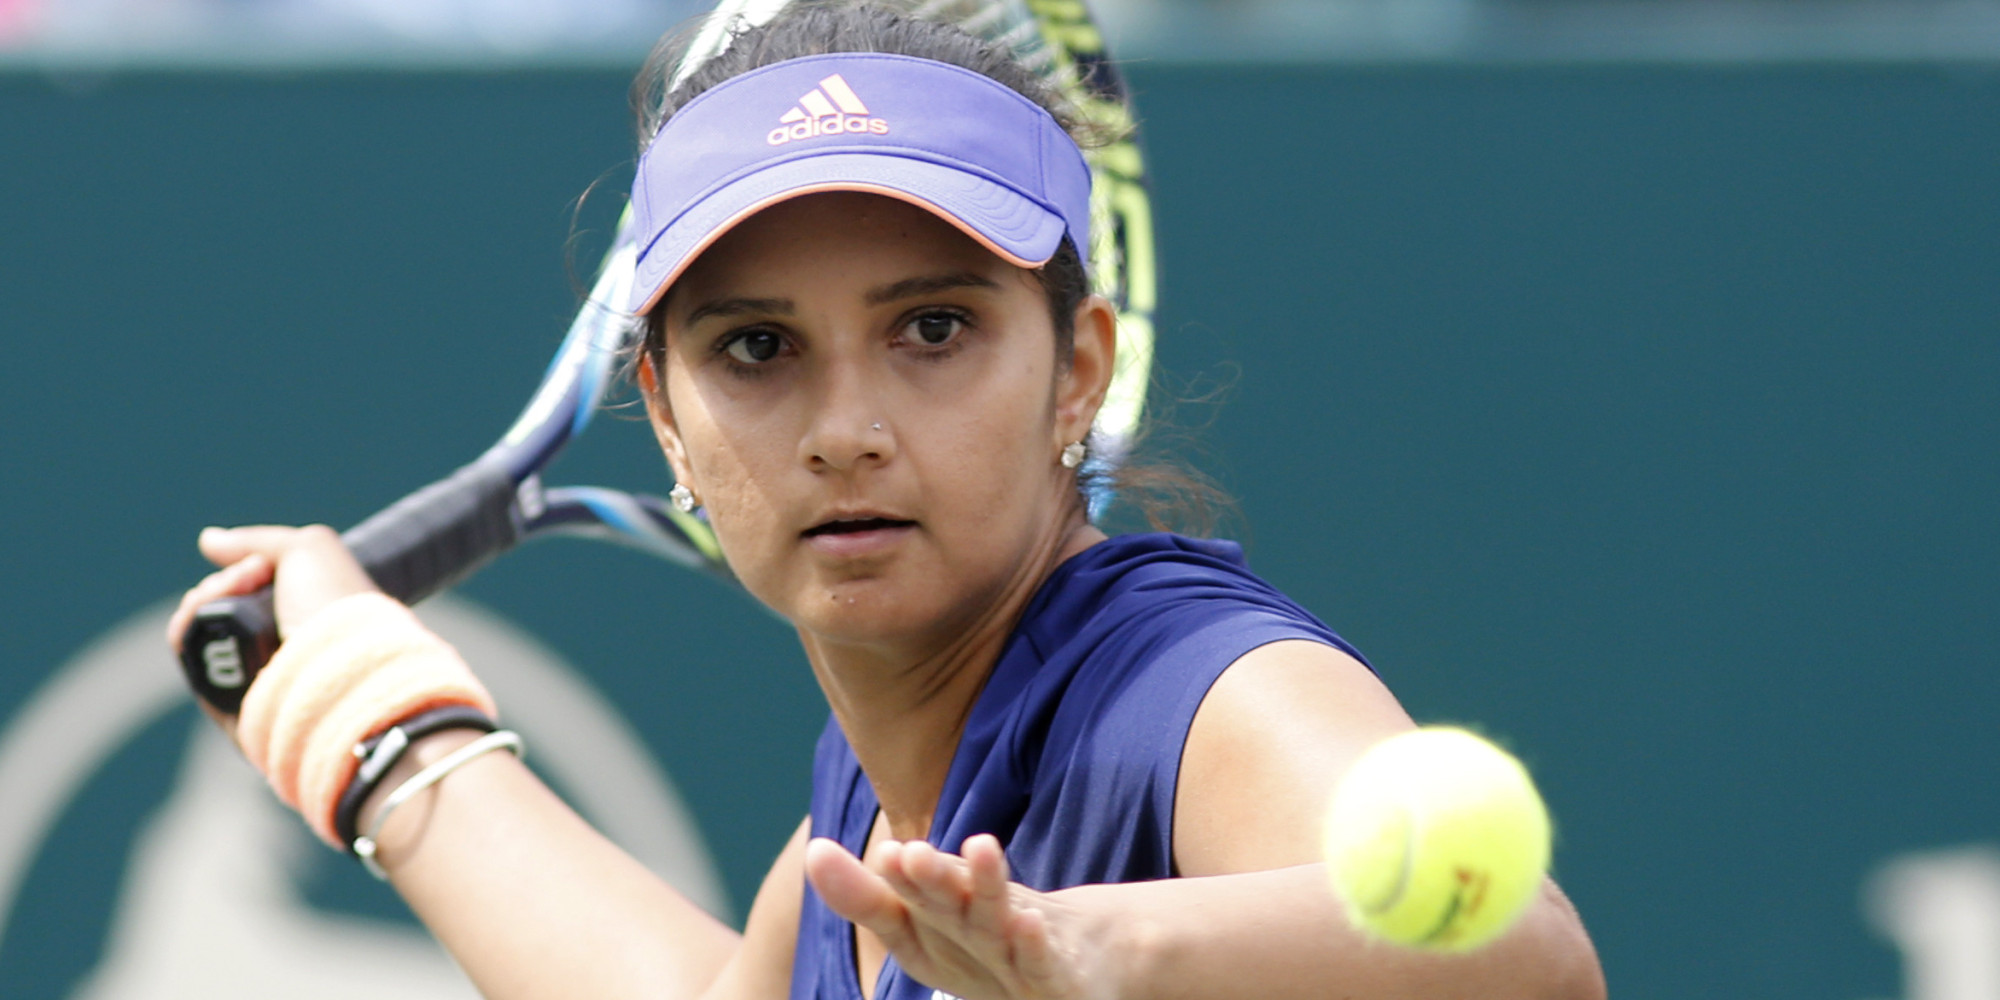 Sania-Mirza-Slams-Media-For-Focusing-On-Tax-Evasion-NewsInstead-Of-Her-Entry-Into-Semi-Finals